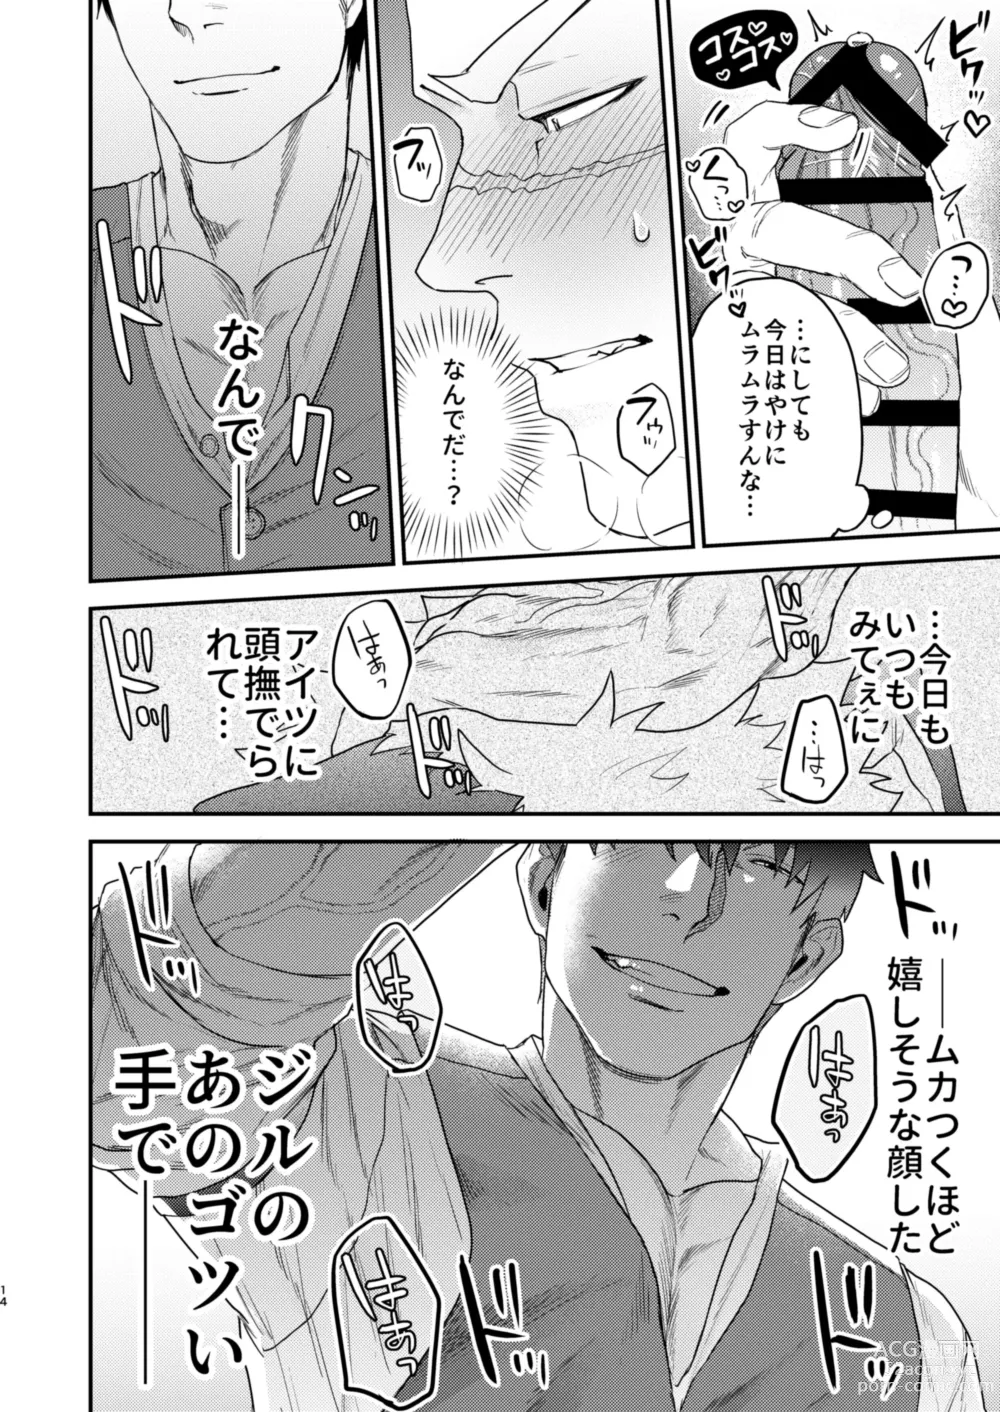 Page 11 of doujinshi It Looks like My Dog is in Heat